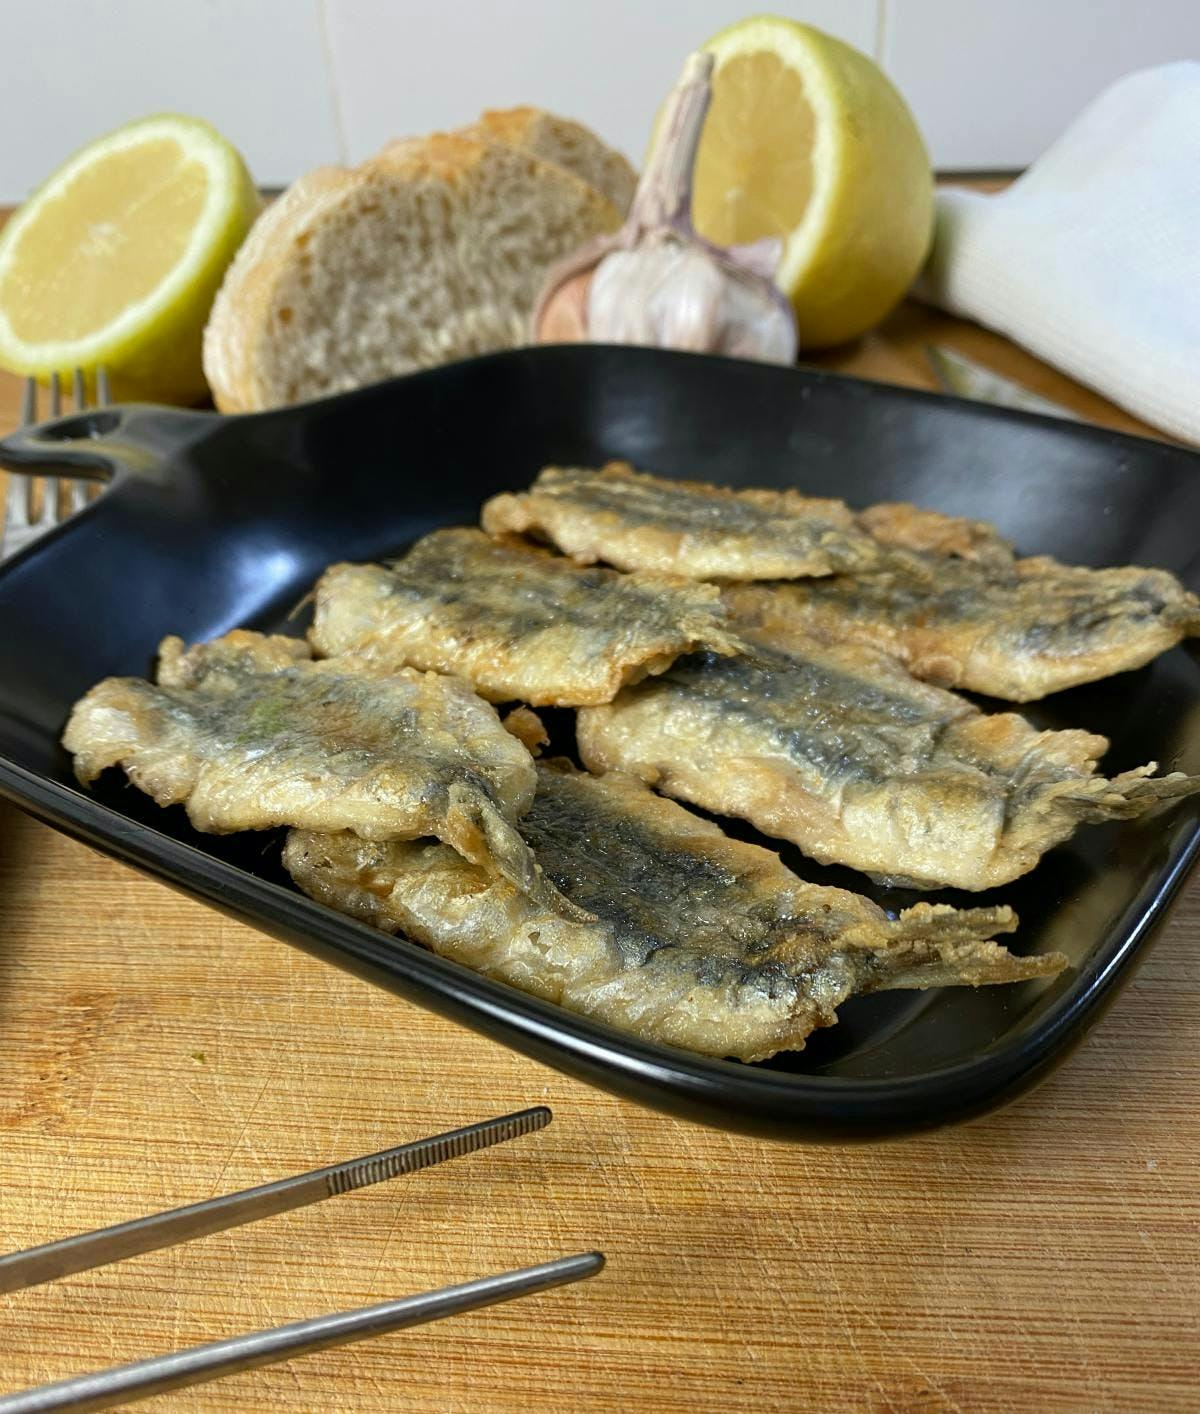 Anchovies marinated in lemon